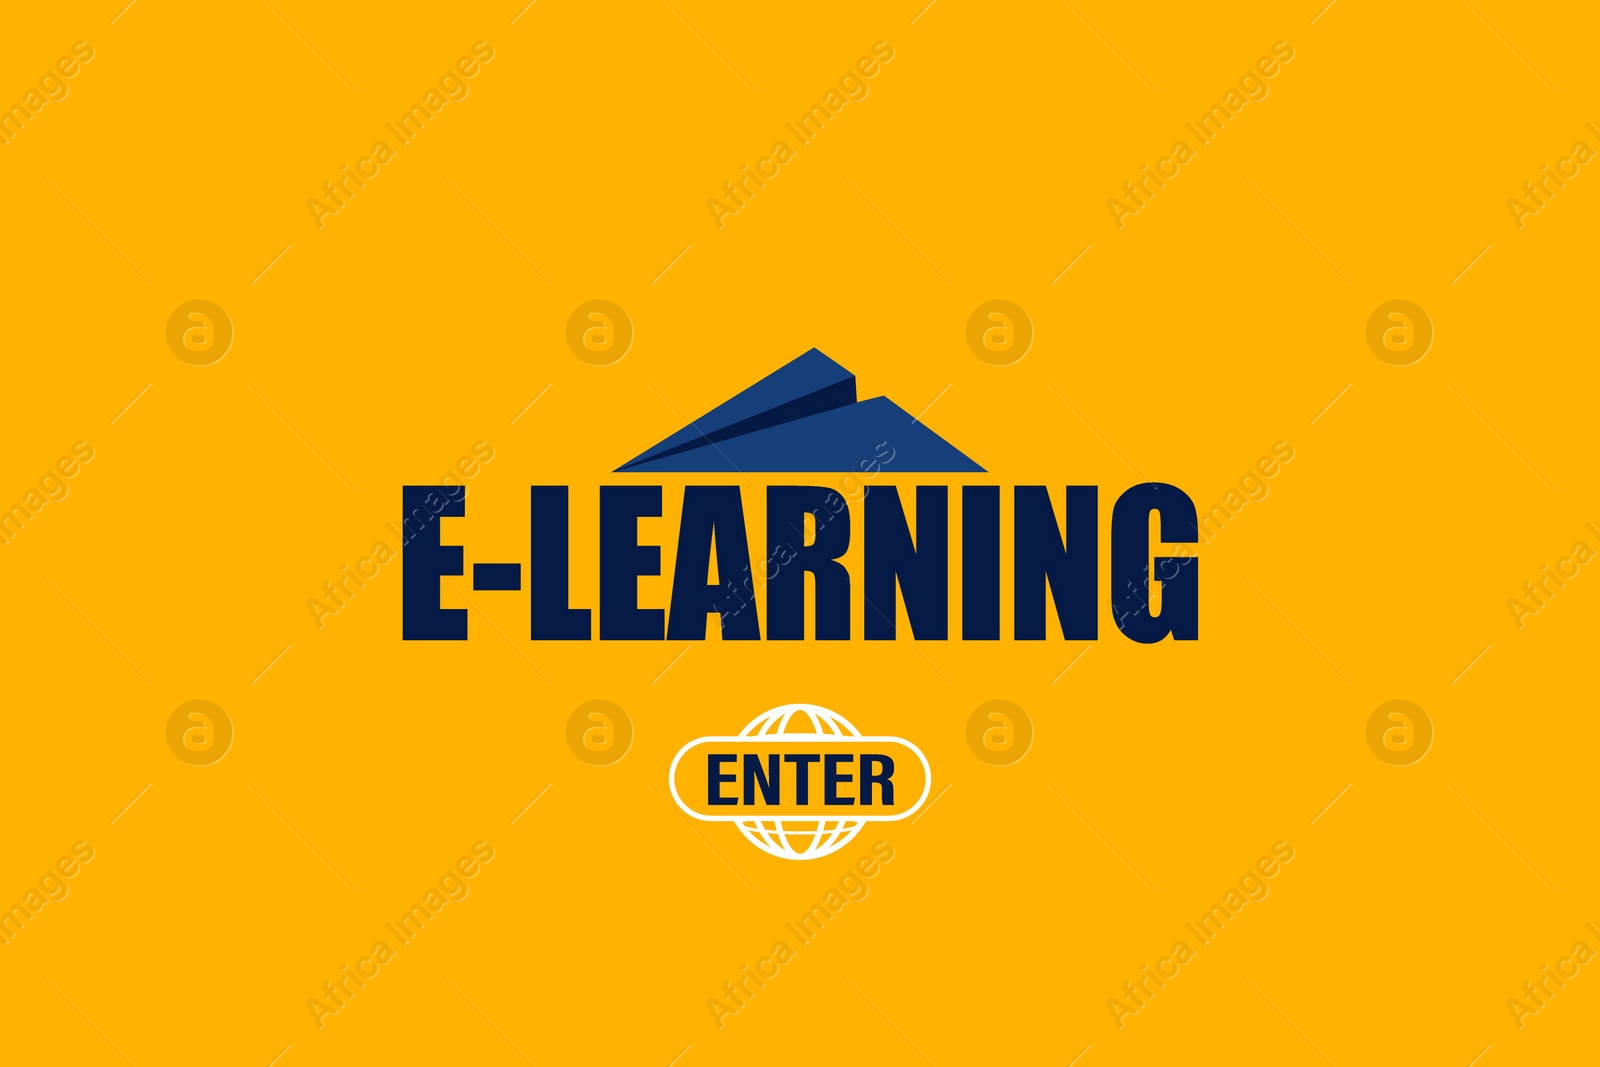 Illustration of Home page of website E- Learning. Illustration